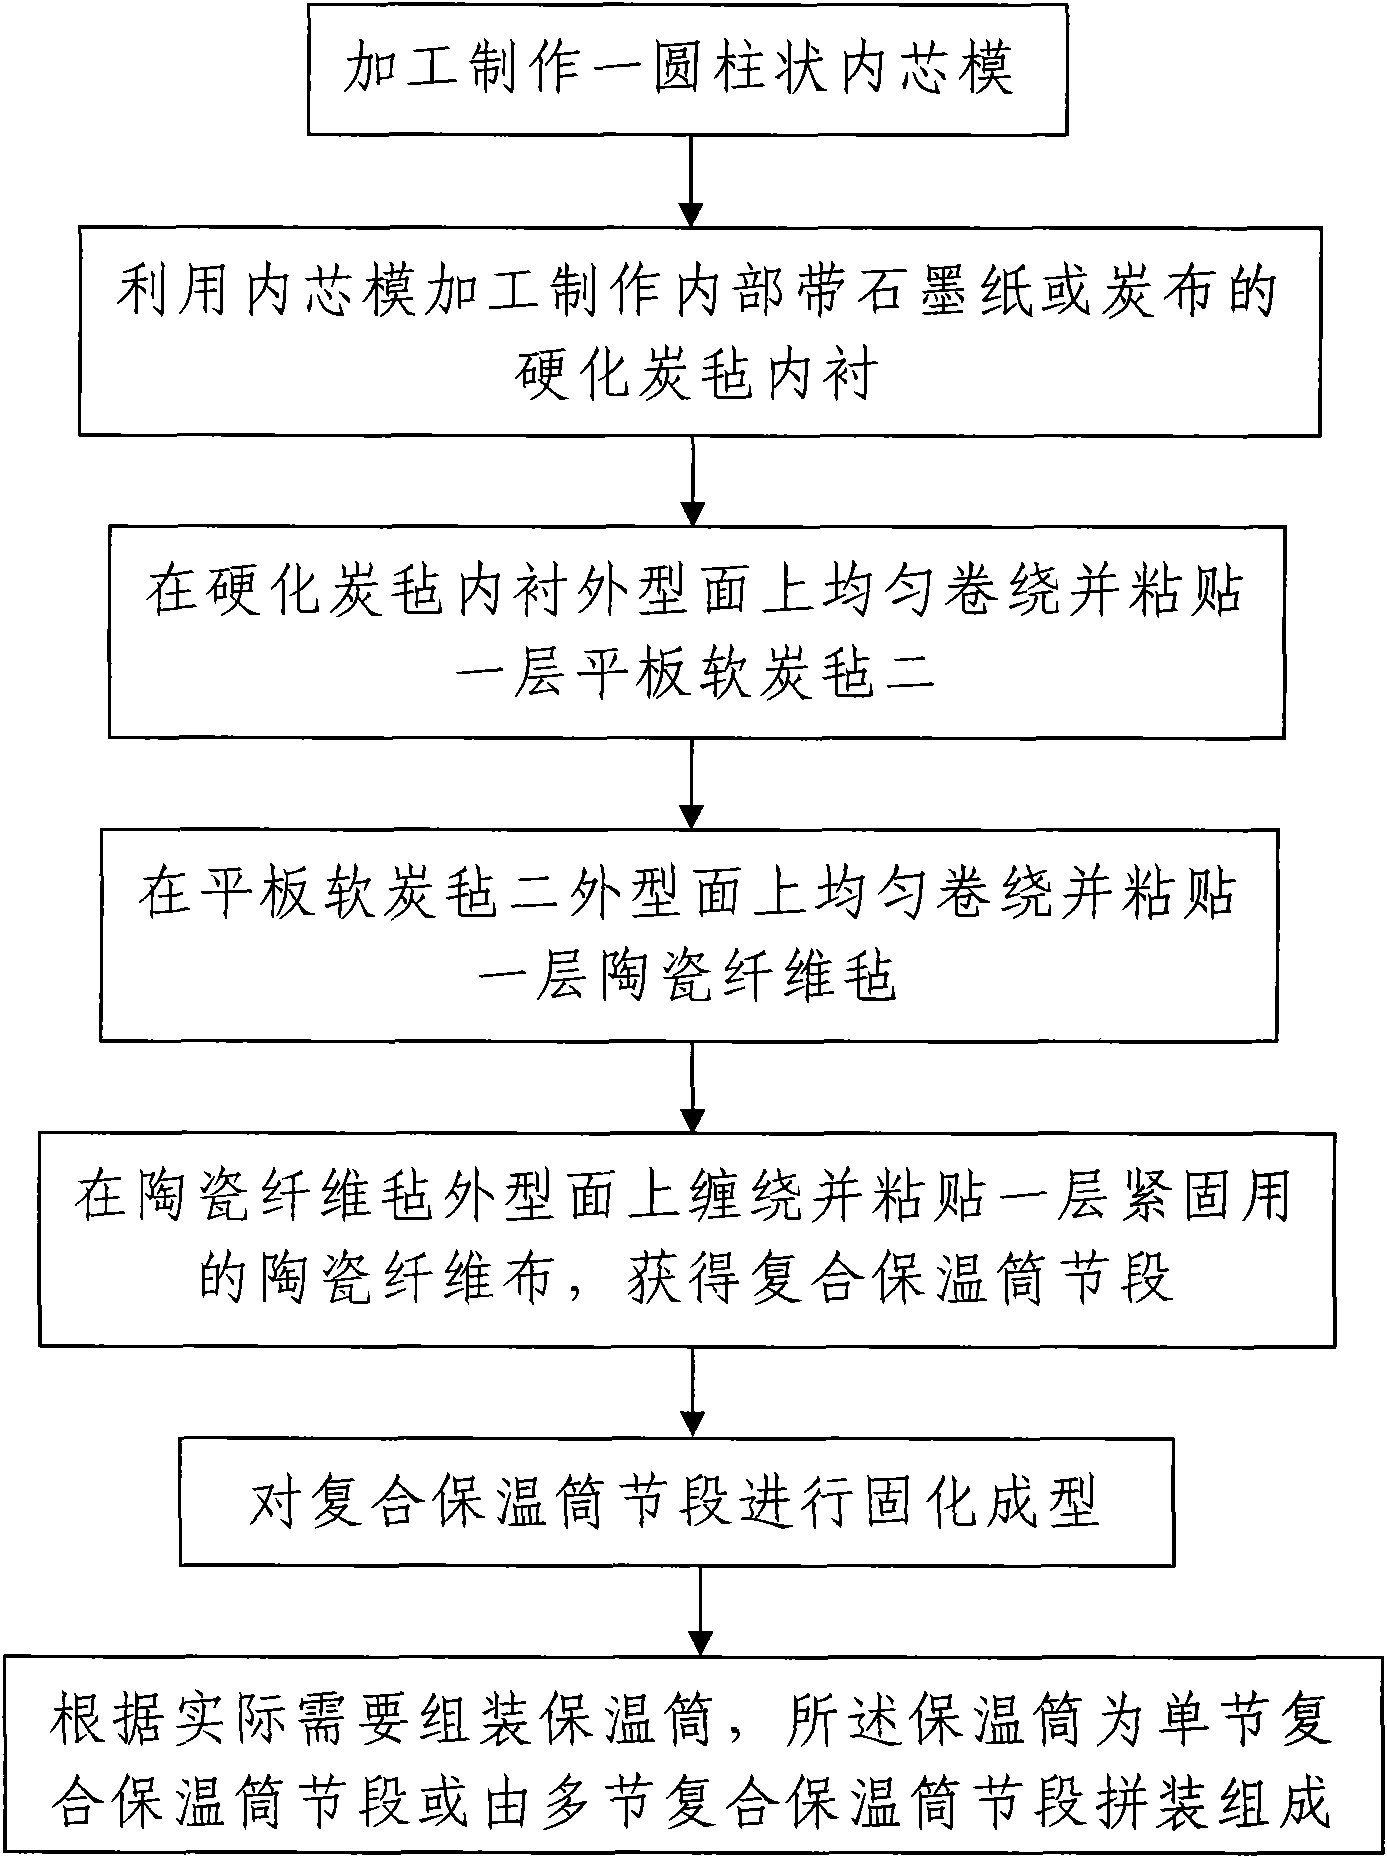 High-temperature metallurgical furnace and method for making compound insulation structure used for high-temperature metallurgical furnace